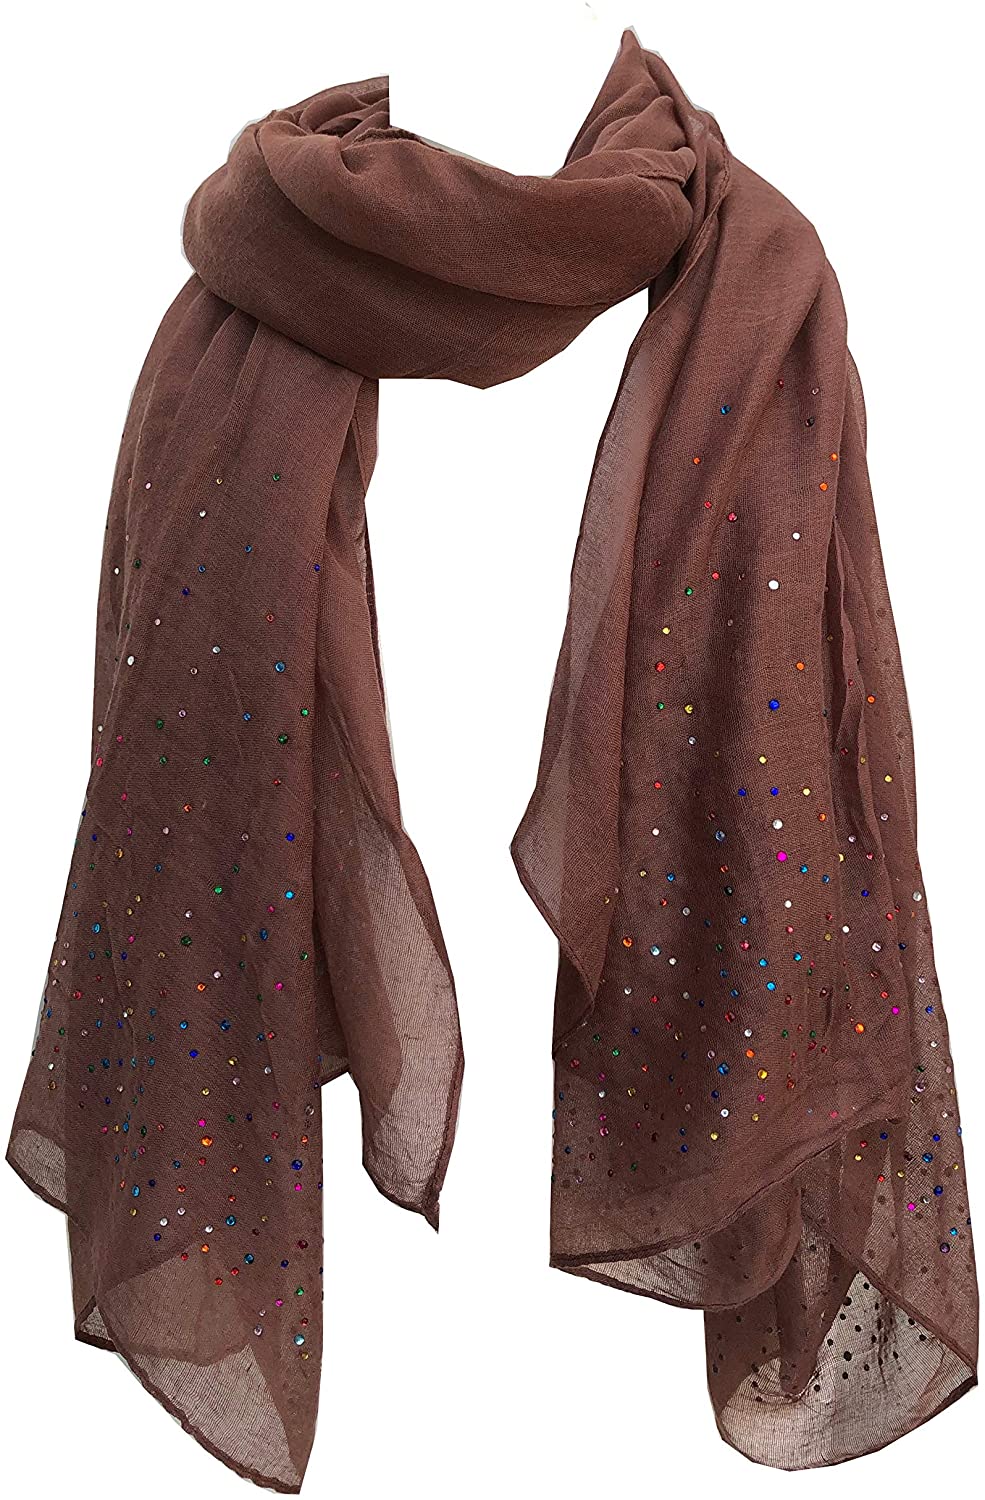 Pamper Yourself Now Plain Brown Scarf with Multi Coloured Sparkle Lovely Long Soft Scarf Fantastic Gift